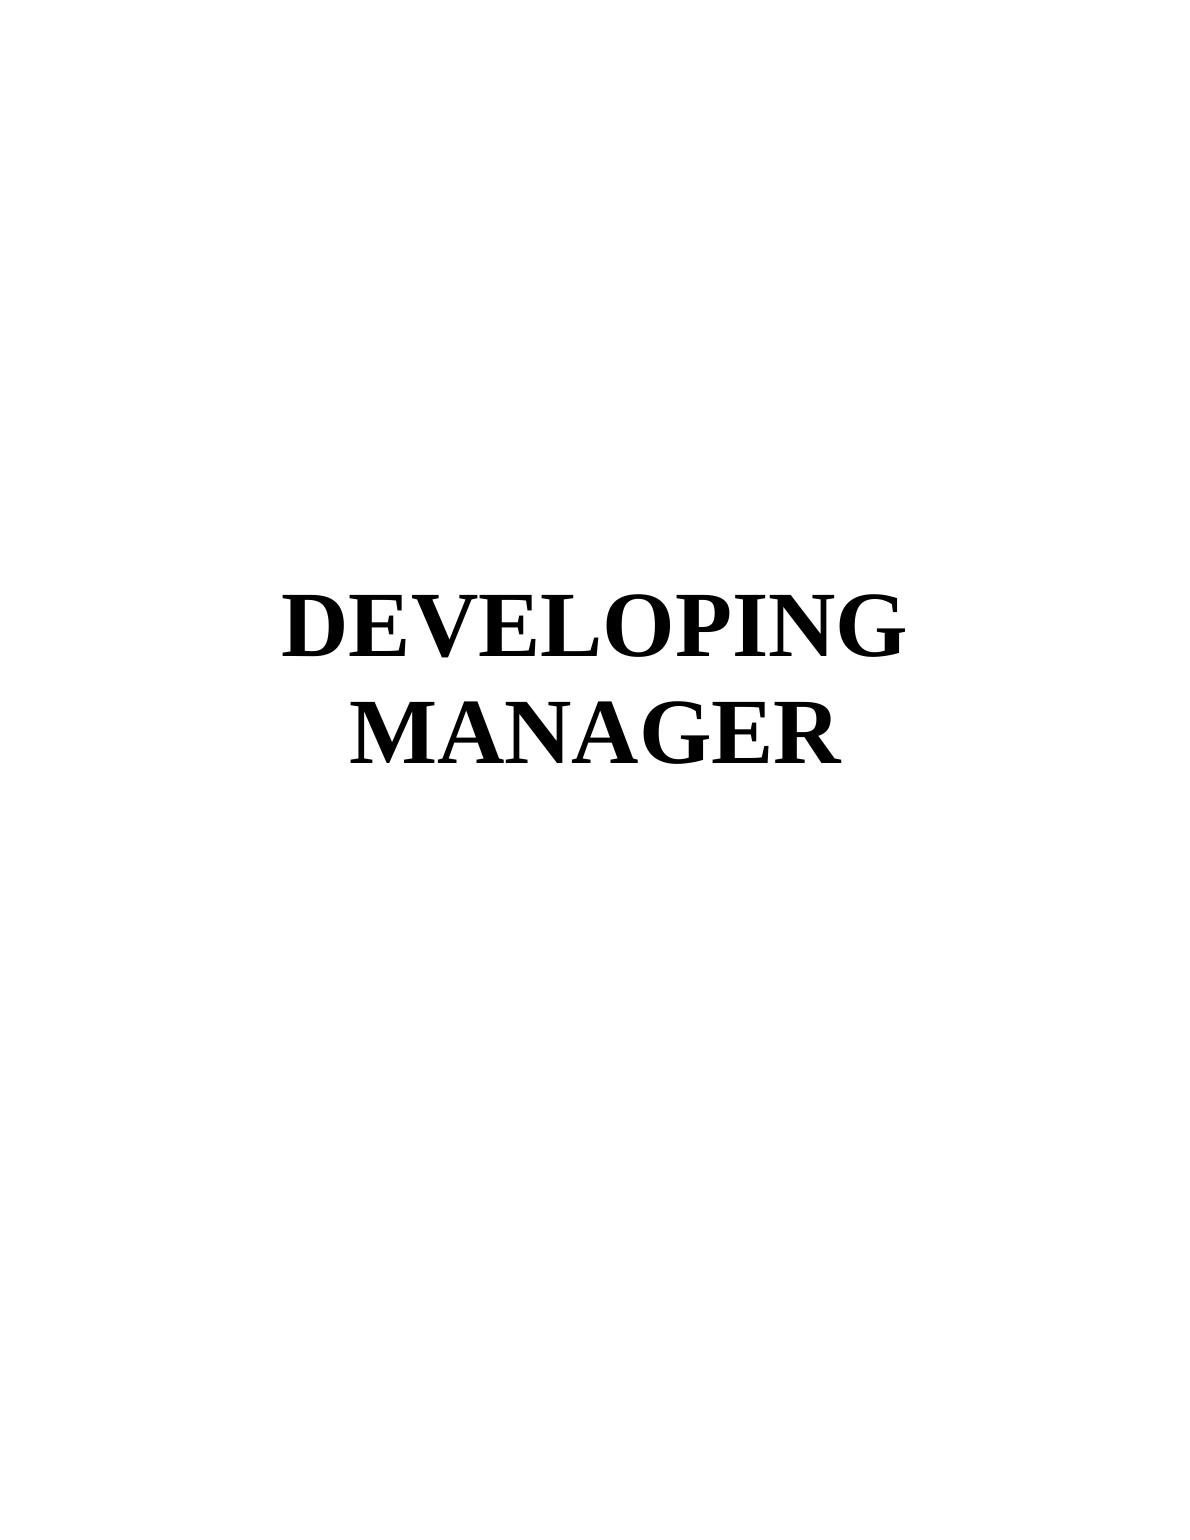 Developing Manager - Assignment_1